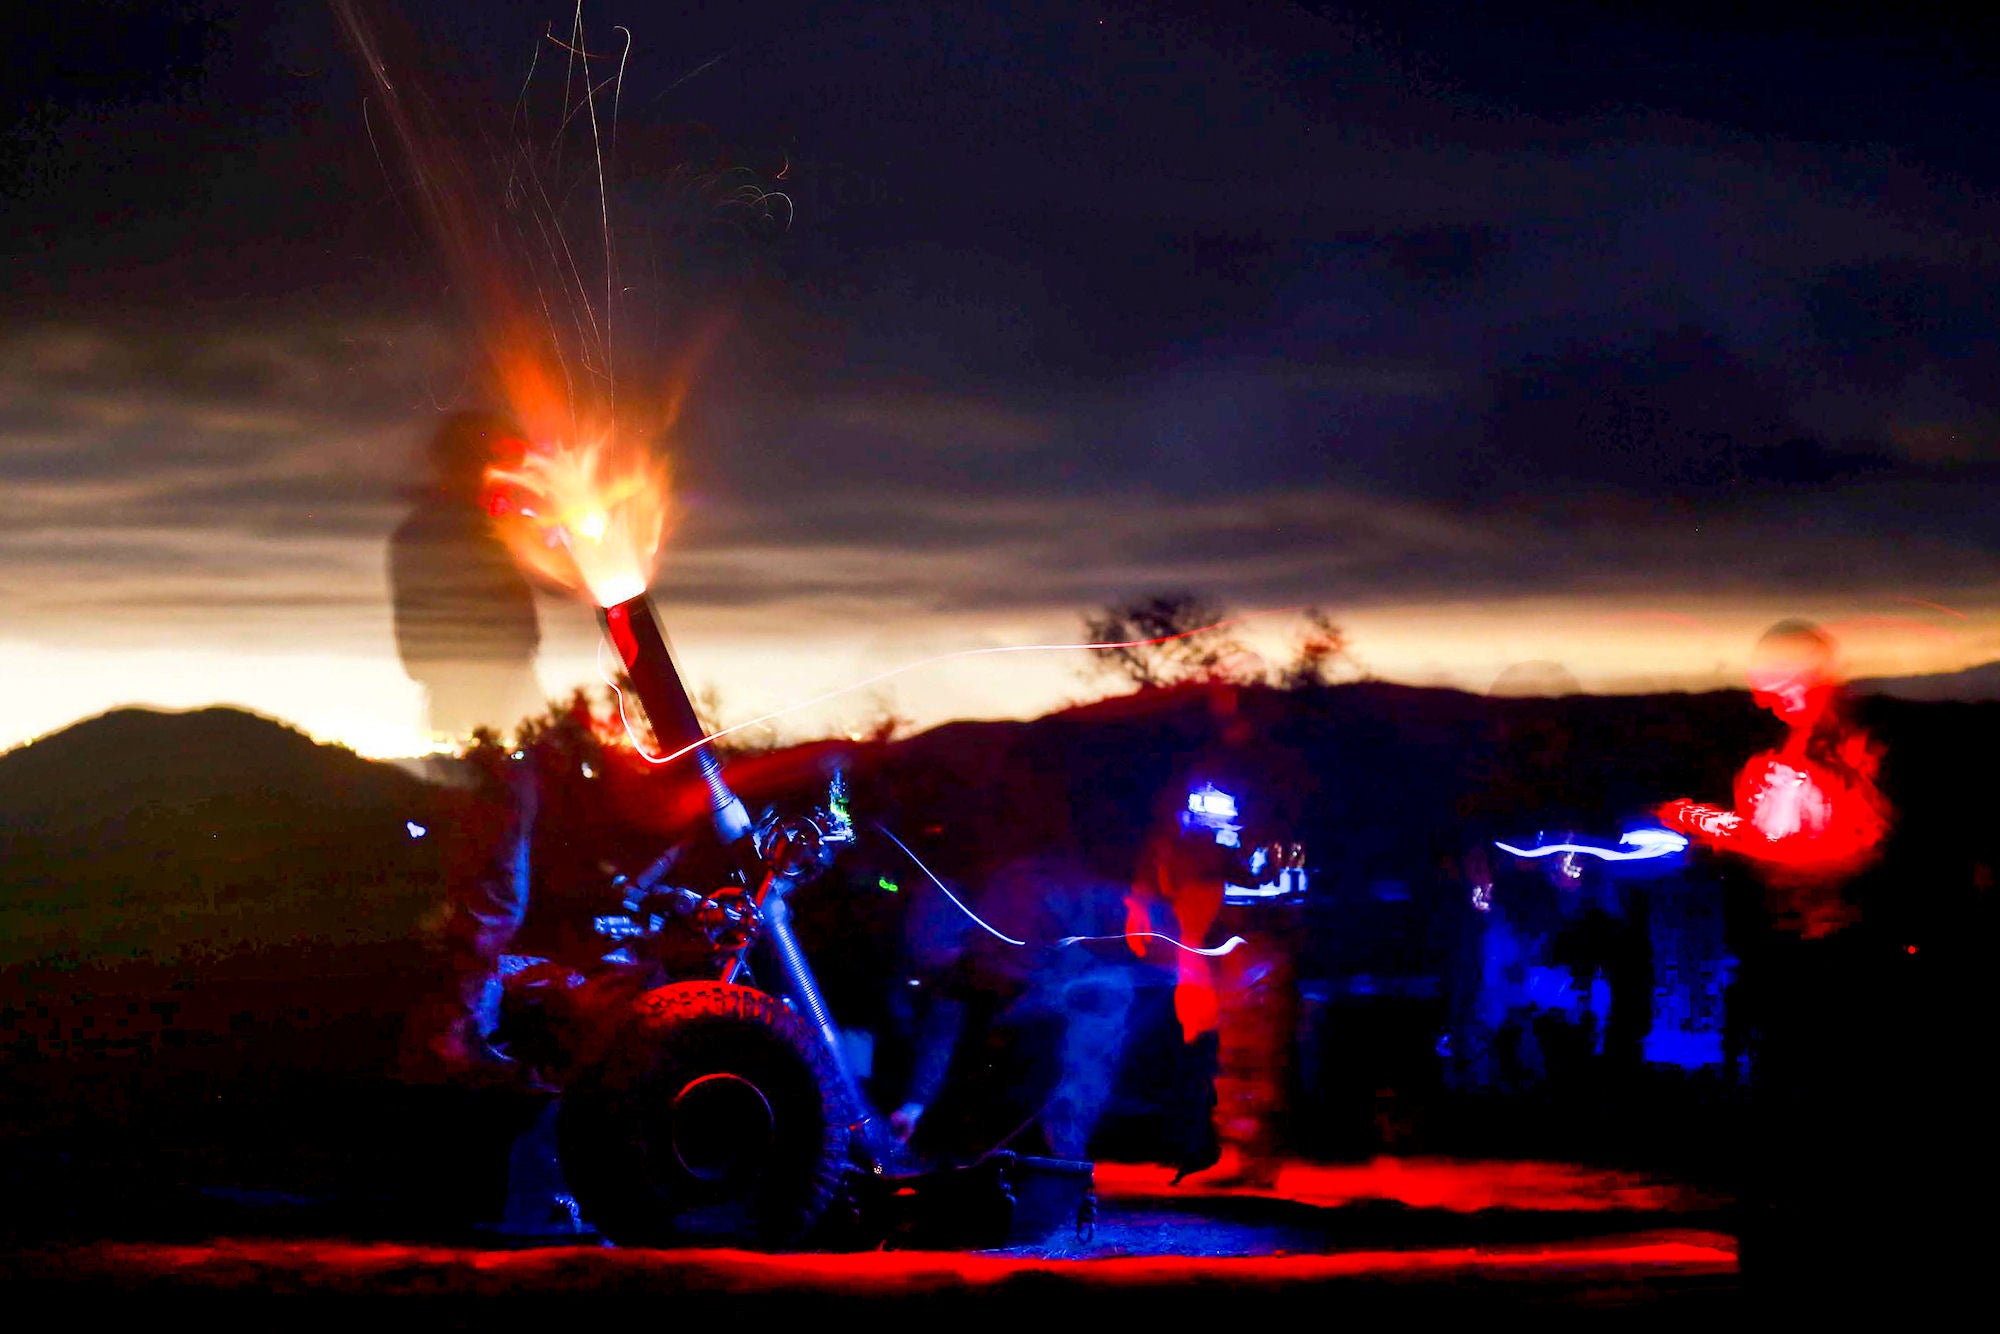  U.S. Marines fire an M120 mortar system during Exercise Iron Fist 2014 at Camp Pendleton, California on February 3rd, 2014. Iron Fist 2014 is an amphibious exercise that brings together U.S. Marines and sailors and Japan Ground Self-Defense Force soldiers for realistic, real-world training. U.S. Marine Corps photo by Sgt. Jamean R. Berry. 